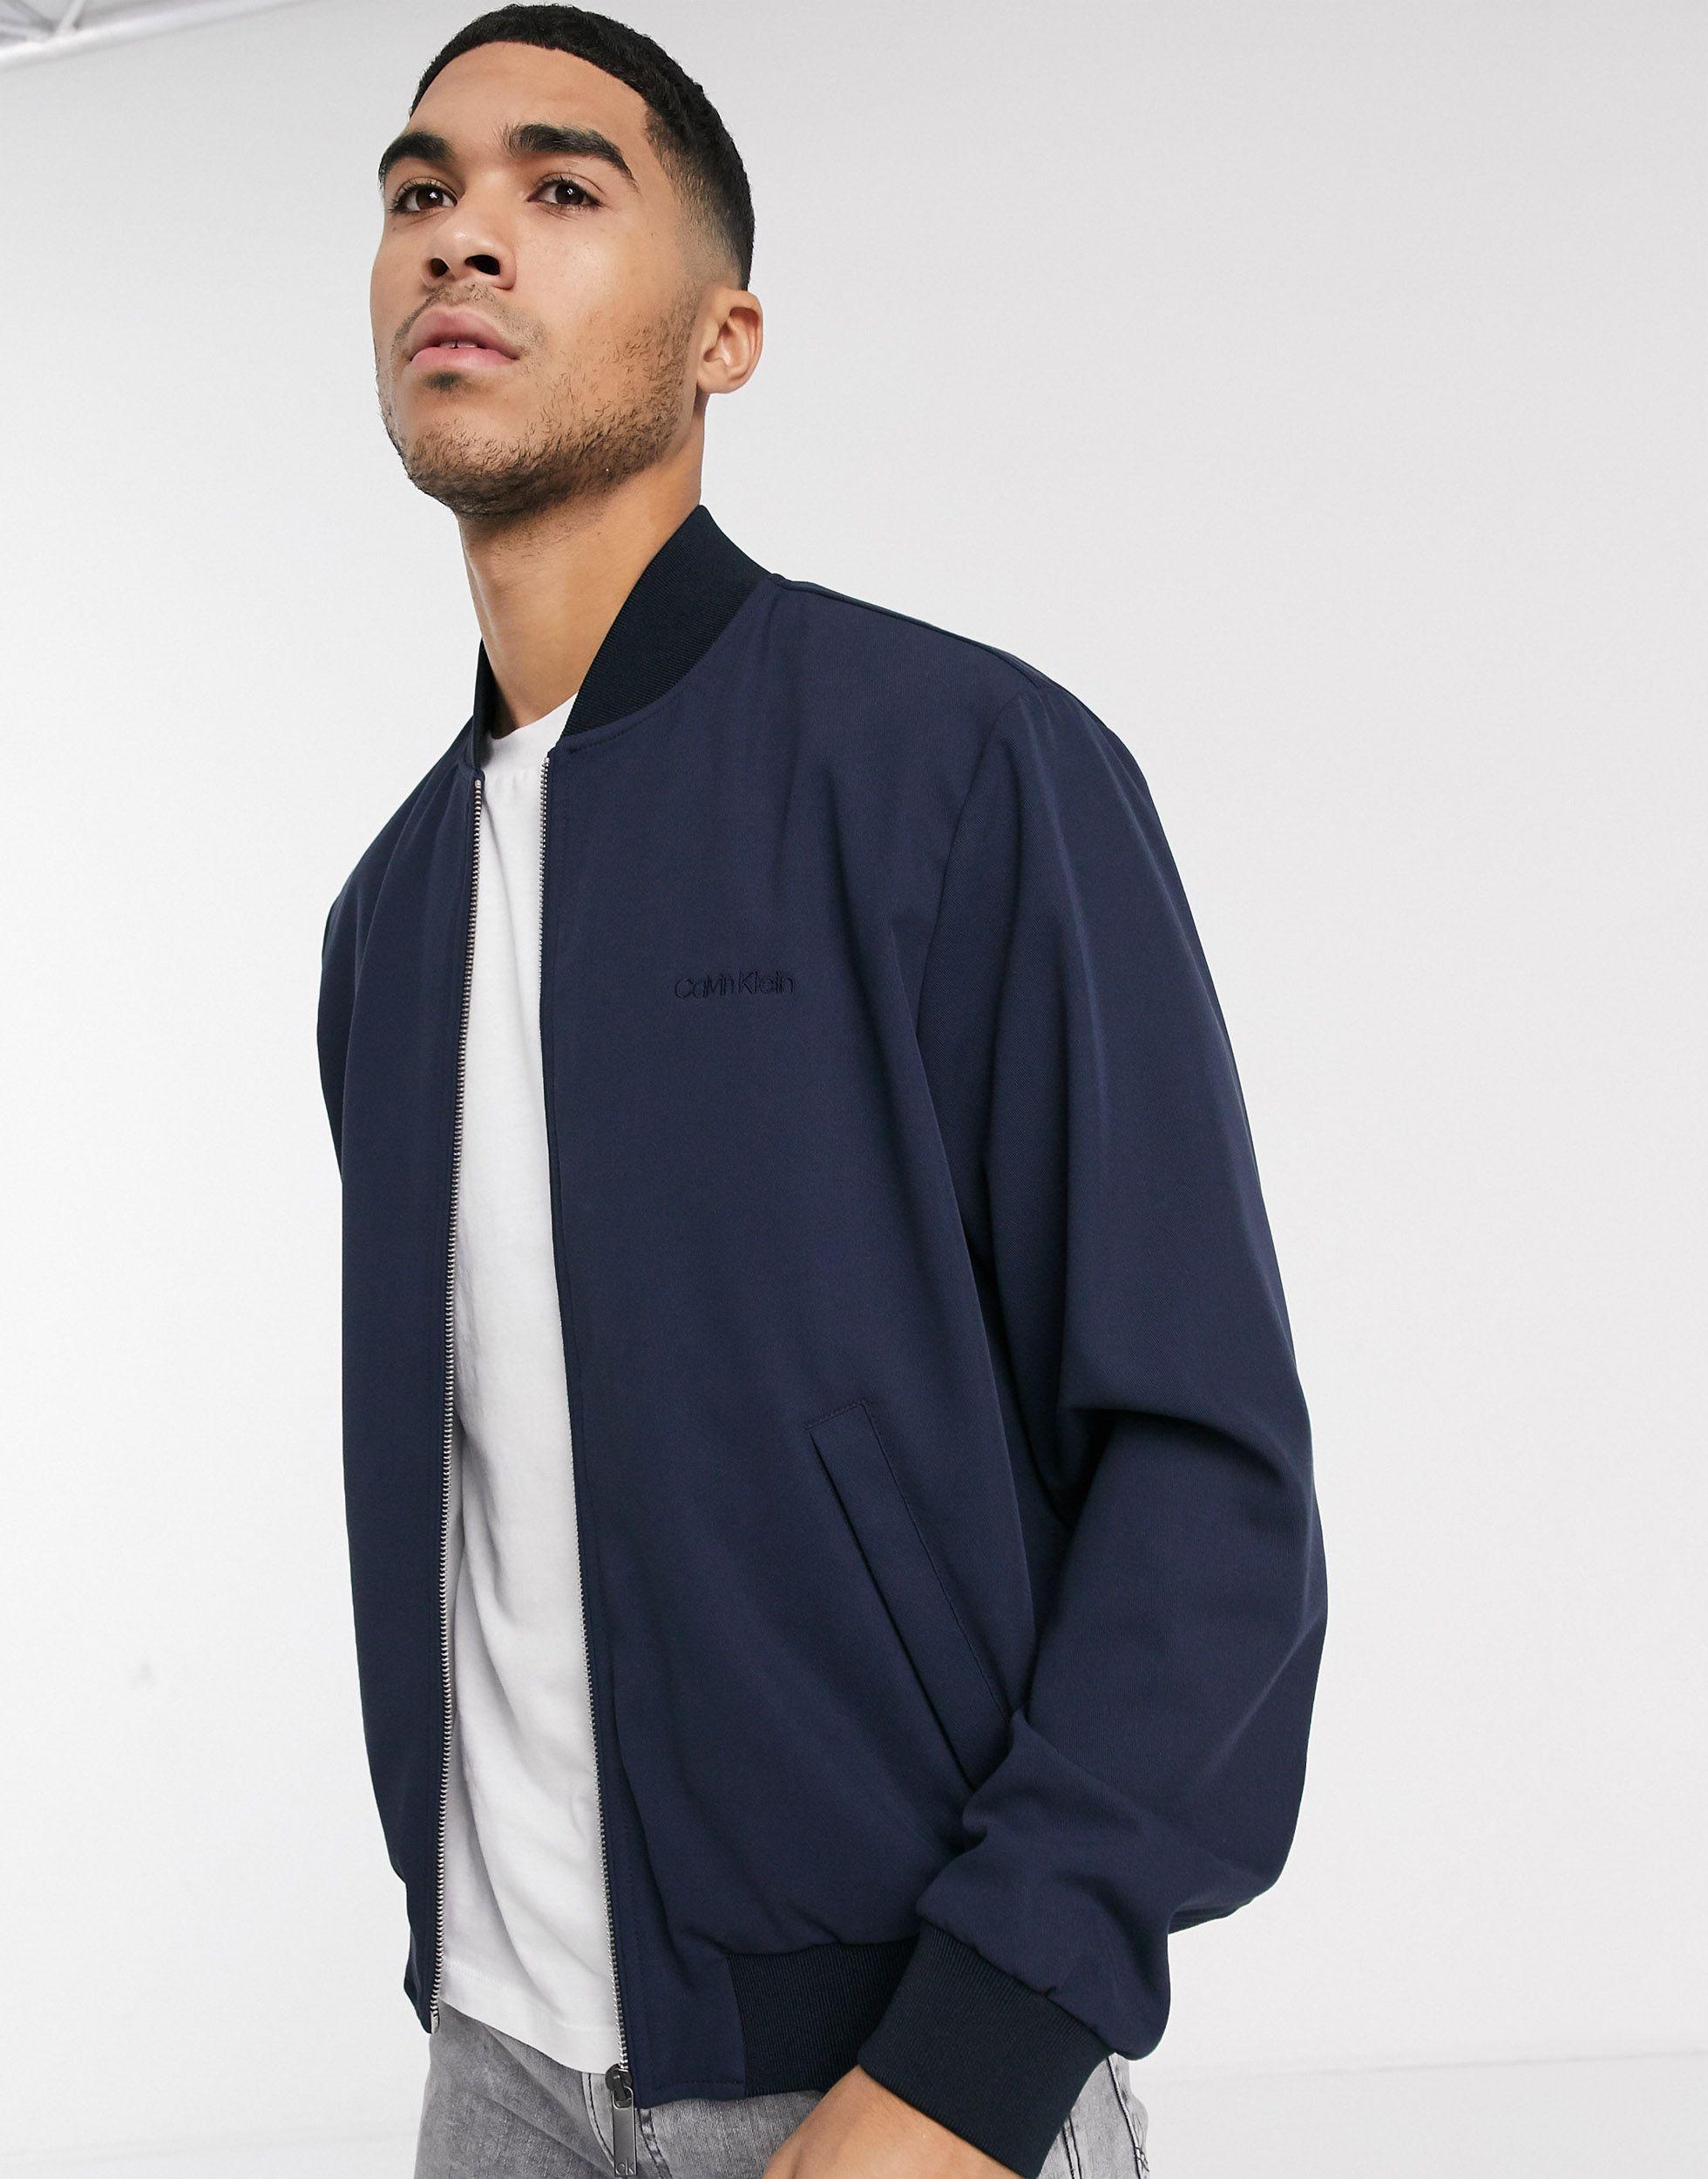 Calvin Klein Synthetic Twill Bomber Jacket in Navy (Blue) for Men - Lyst